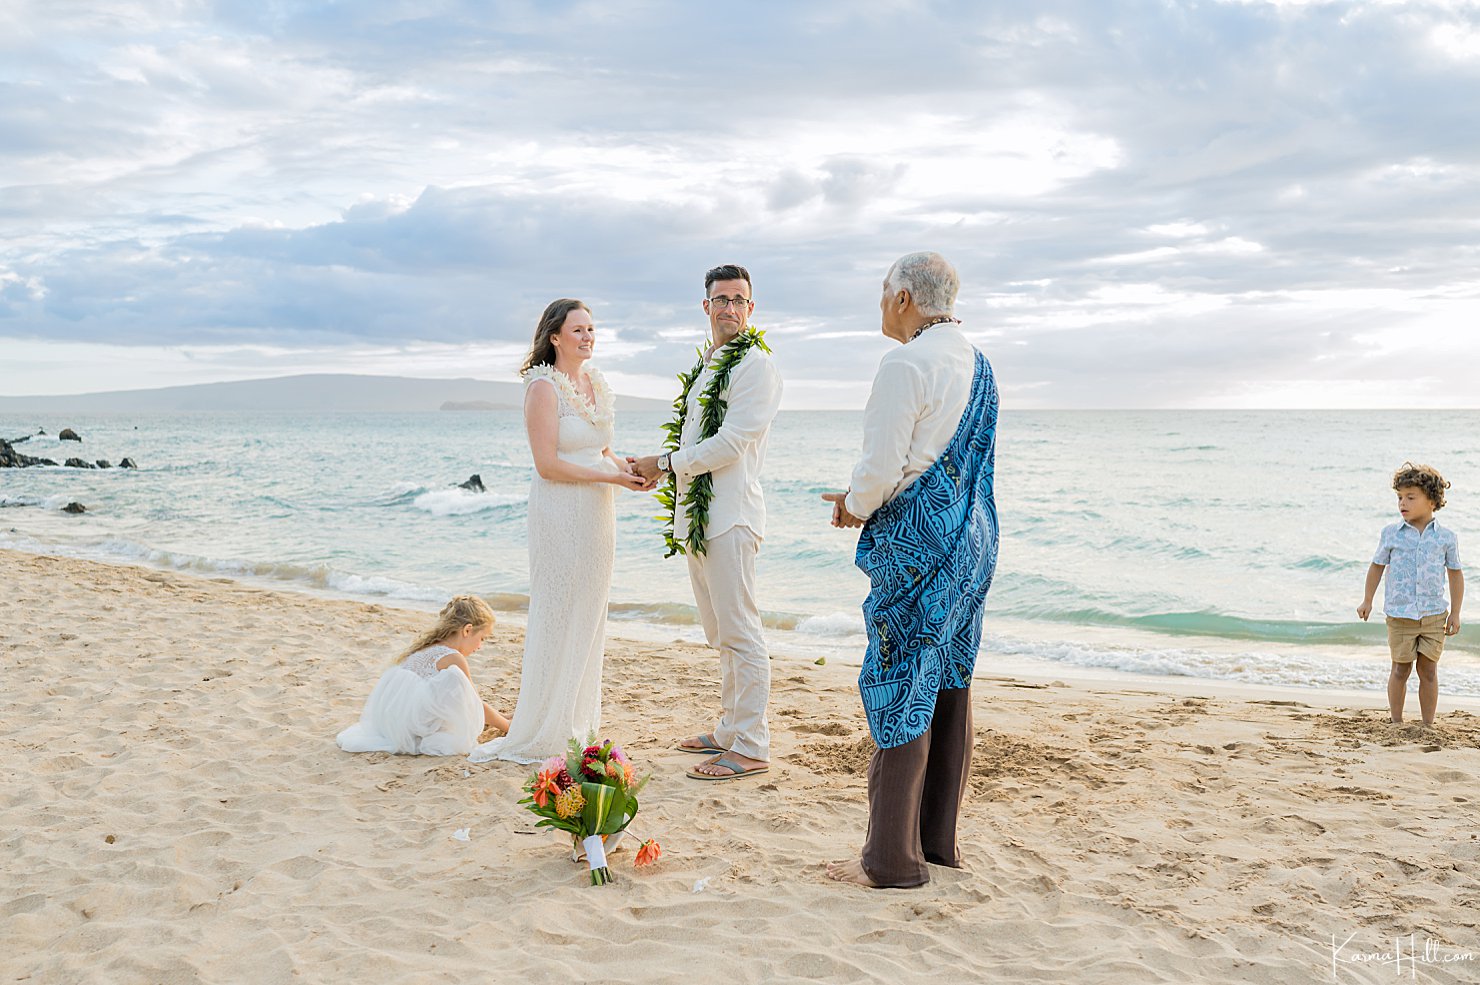 Family-friendly Hawaii Vow Renewals 